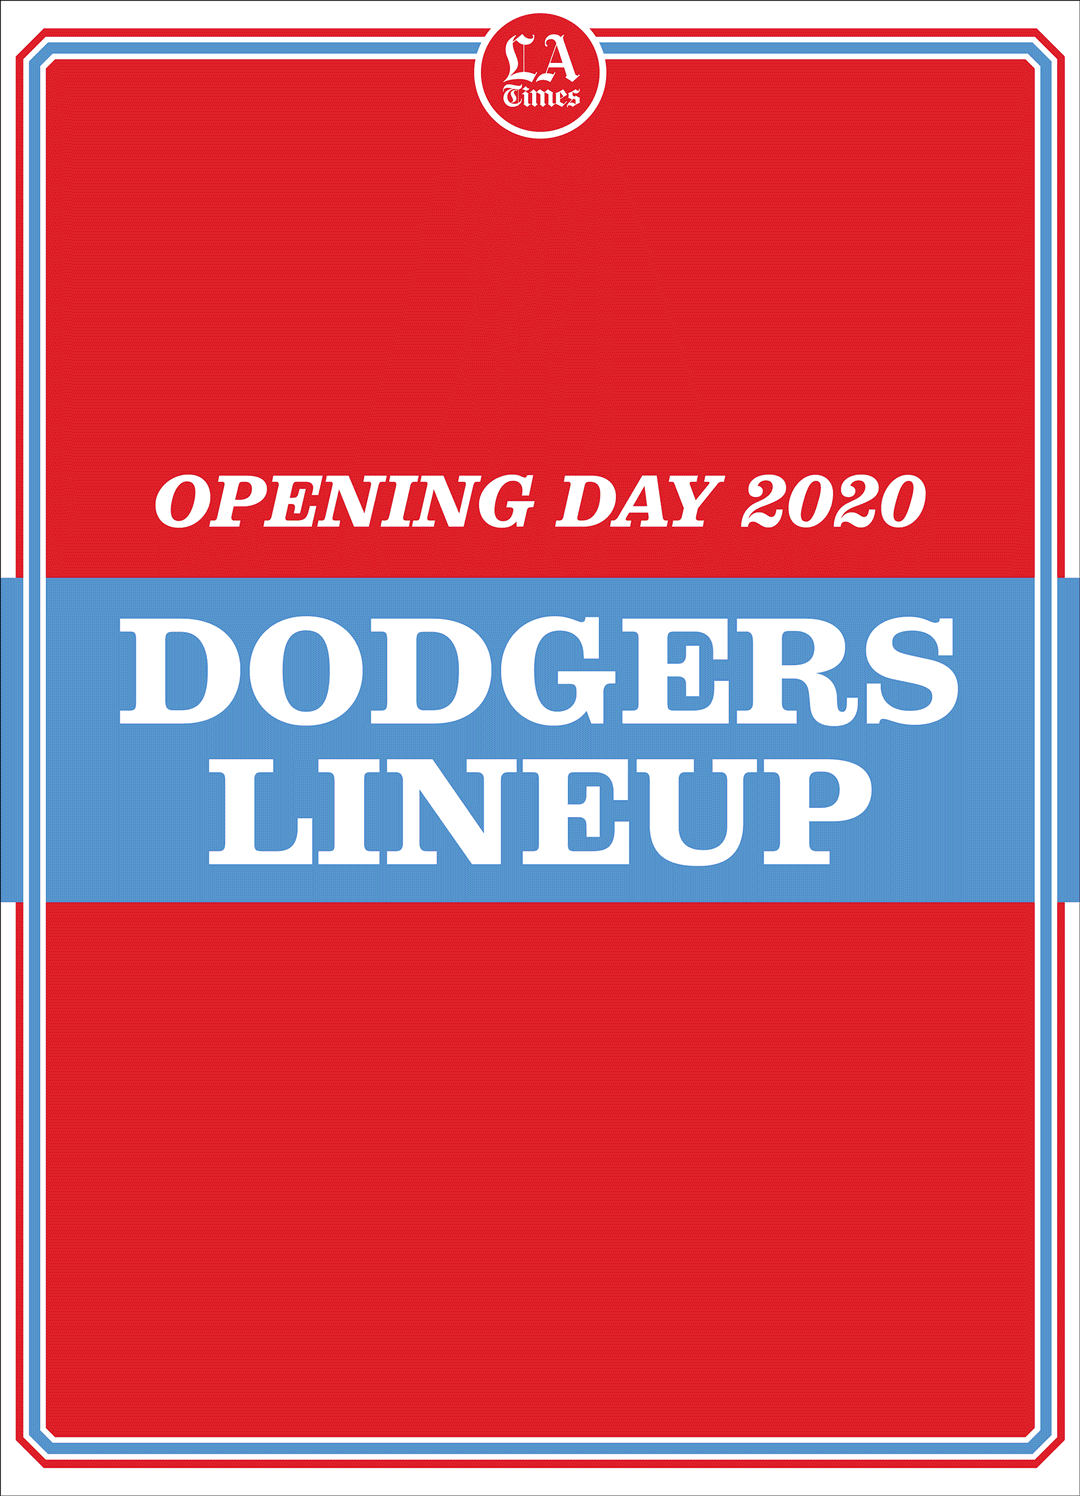 Dodgers opening day lineup.